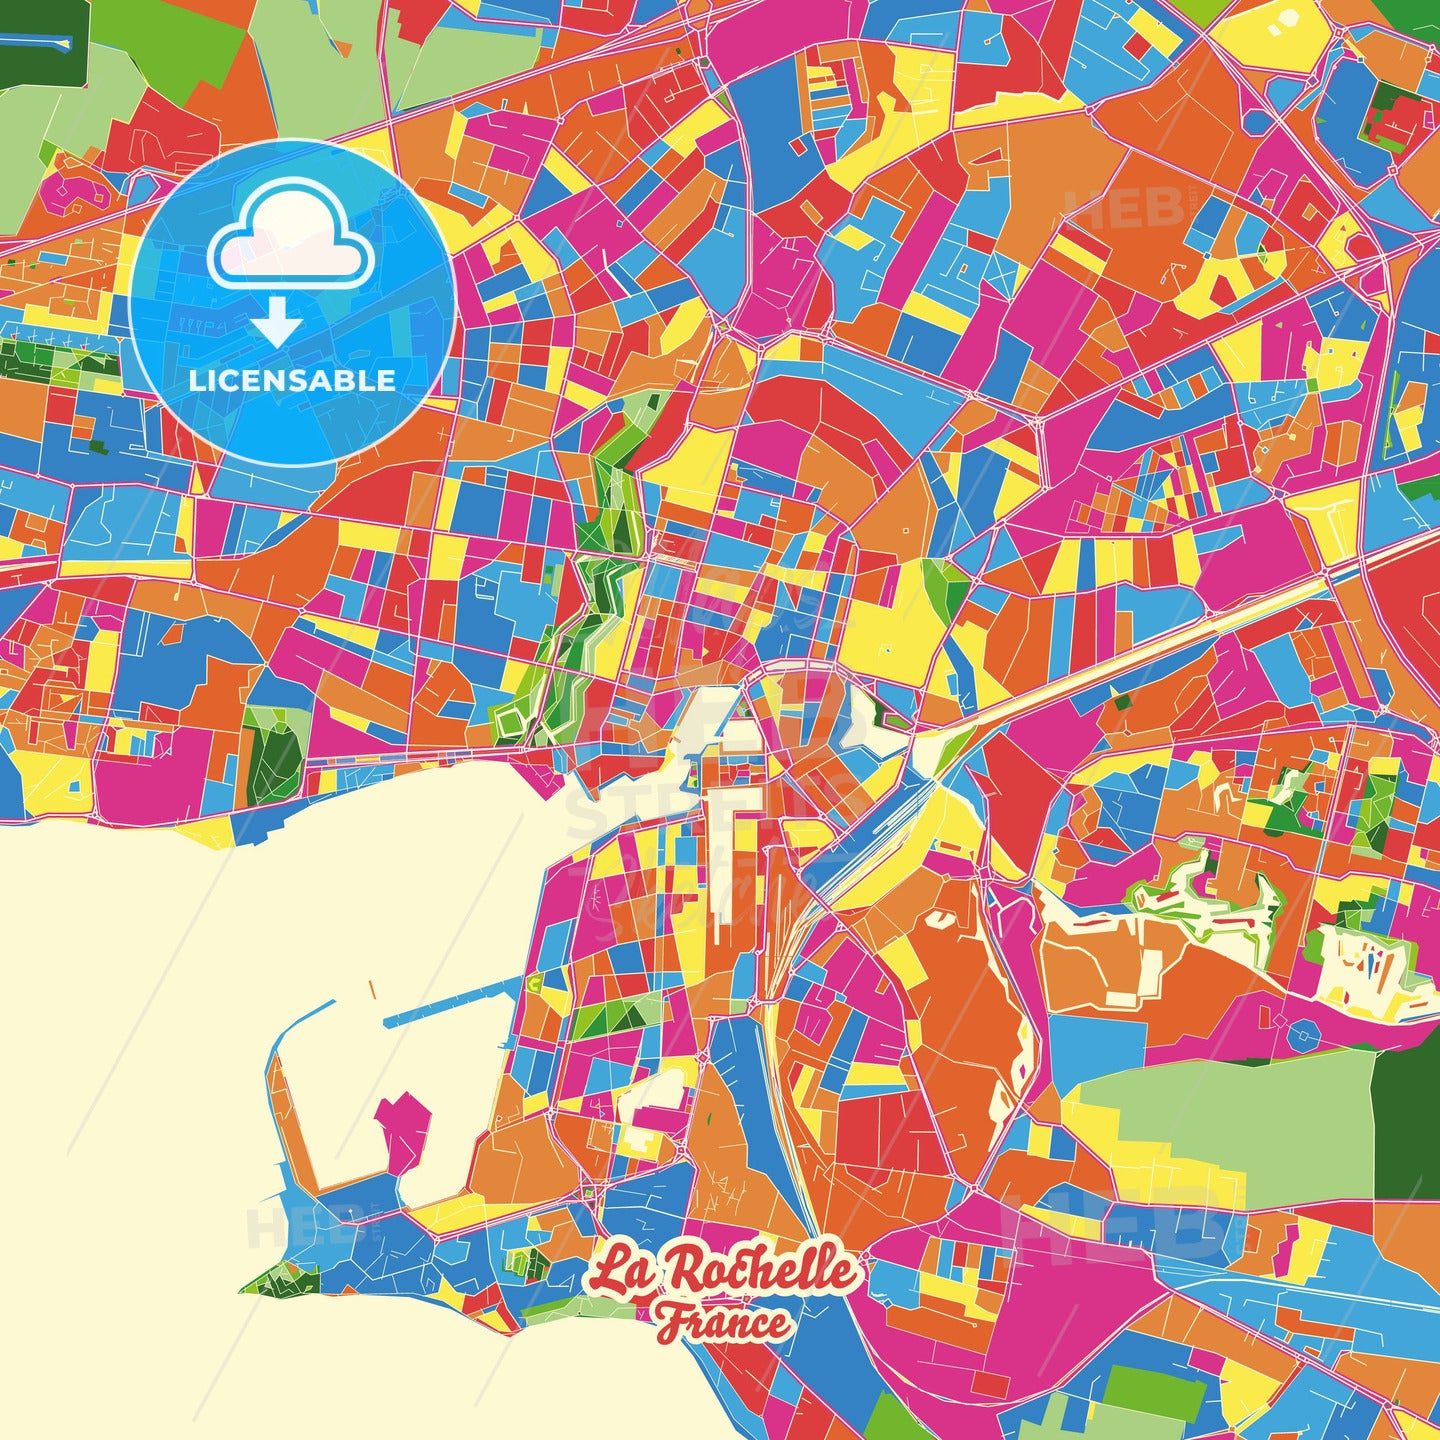 La Rochelle, France Crazy Colorful Street Map Poster Template - HEBSTREITS Sketches